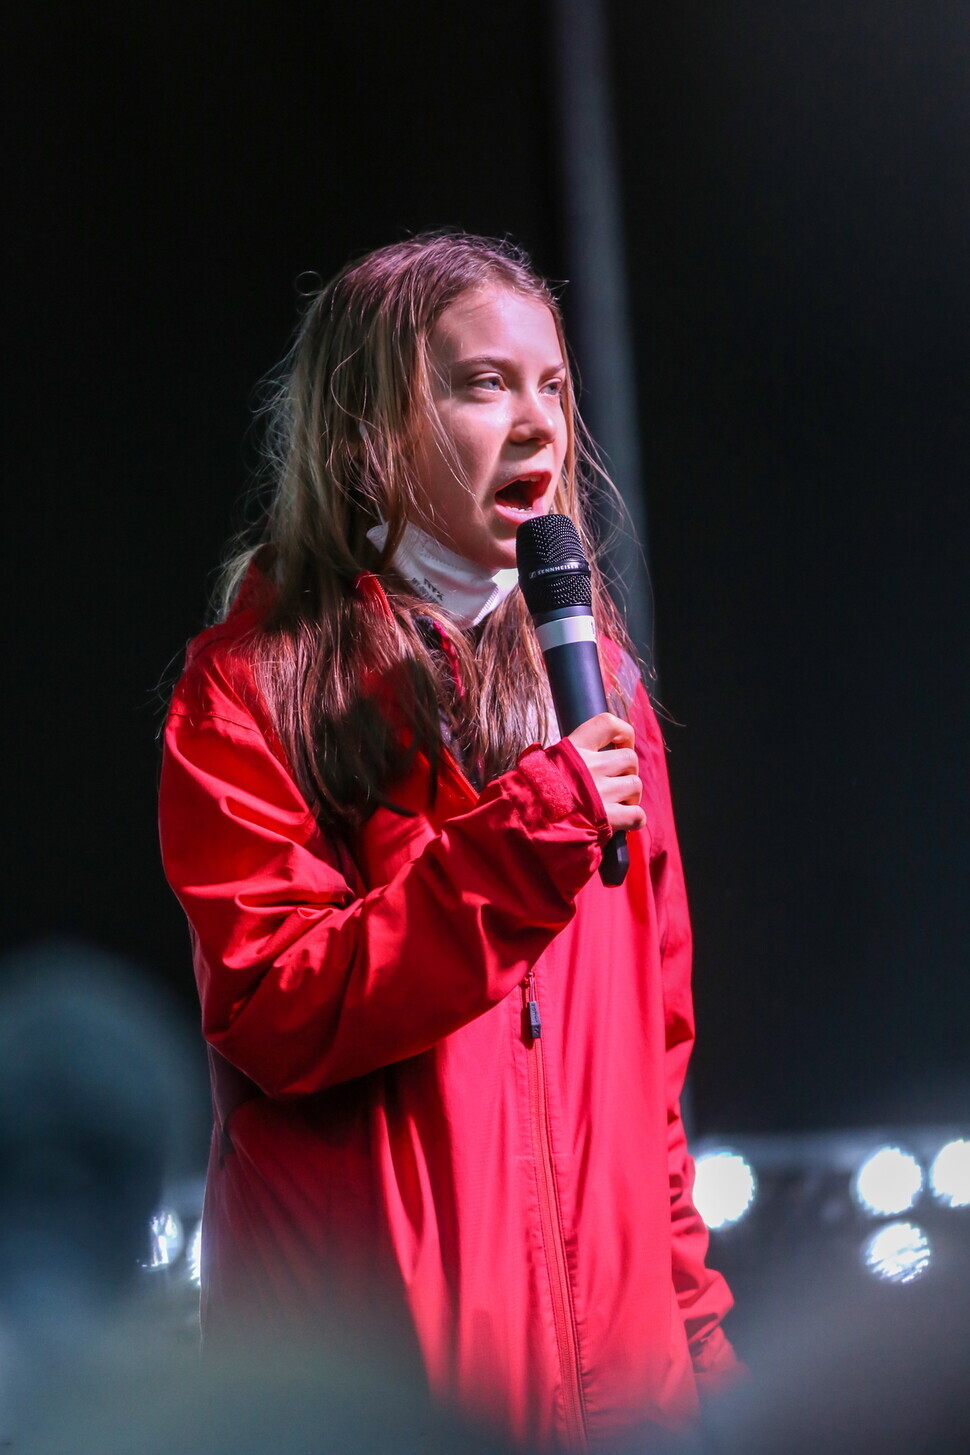 Swedish climate activist Greta Thunberg speaks to a crowd of thousands gathered in George Square in Glasgow, Scotland, on Nov. 5. (EPA/Yonhap News)